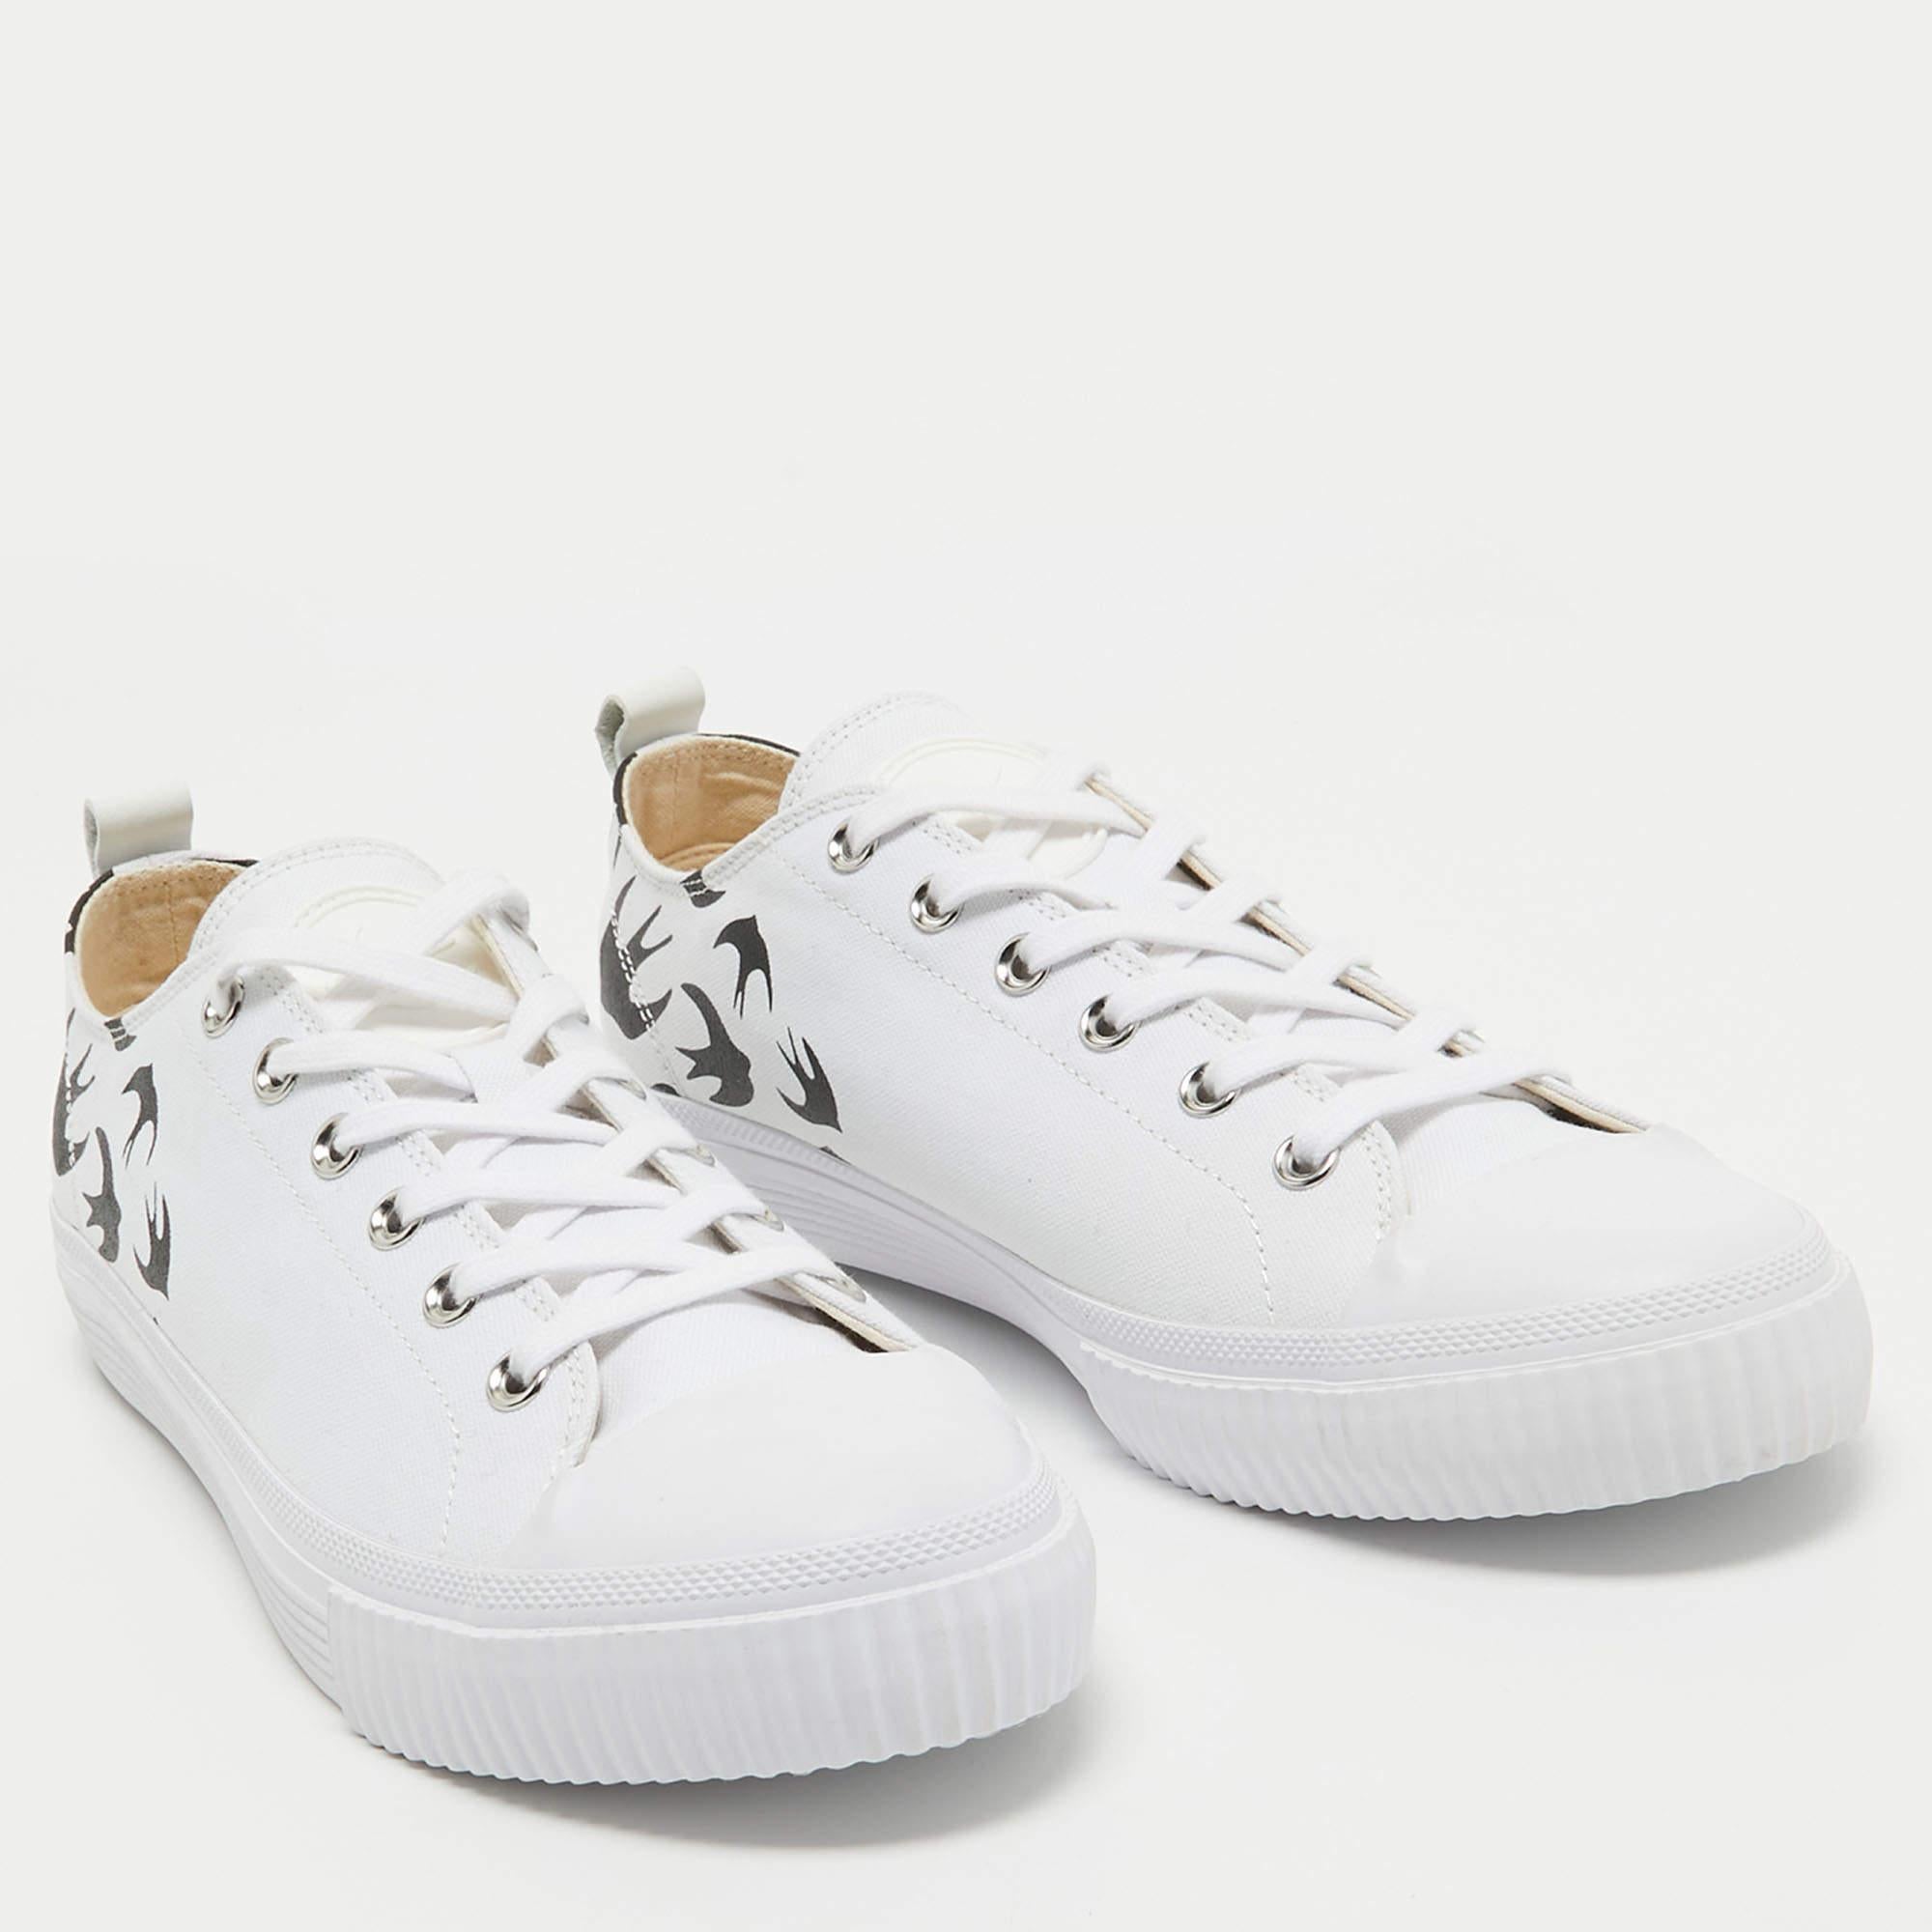 These McQ by Alexander McQueen sneakers represent the idea of comfortable fashion. They are crafted from high-quality materials and designed with nothing but style. A perfect fit for all casual occasions, these sneakers will spruce up any look